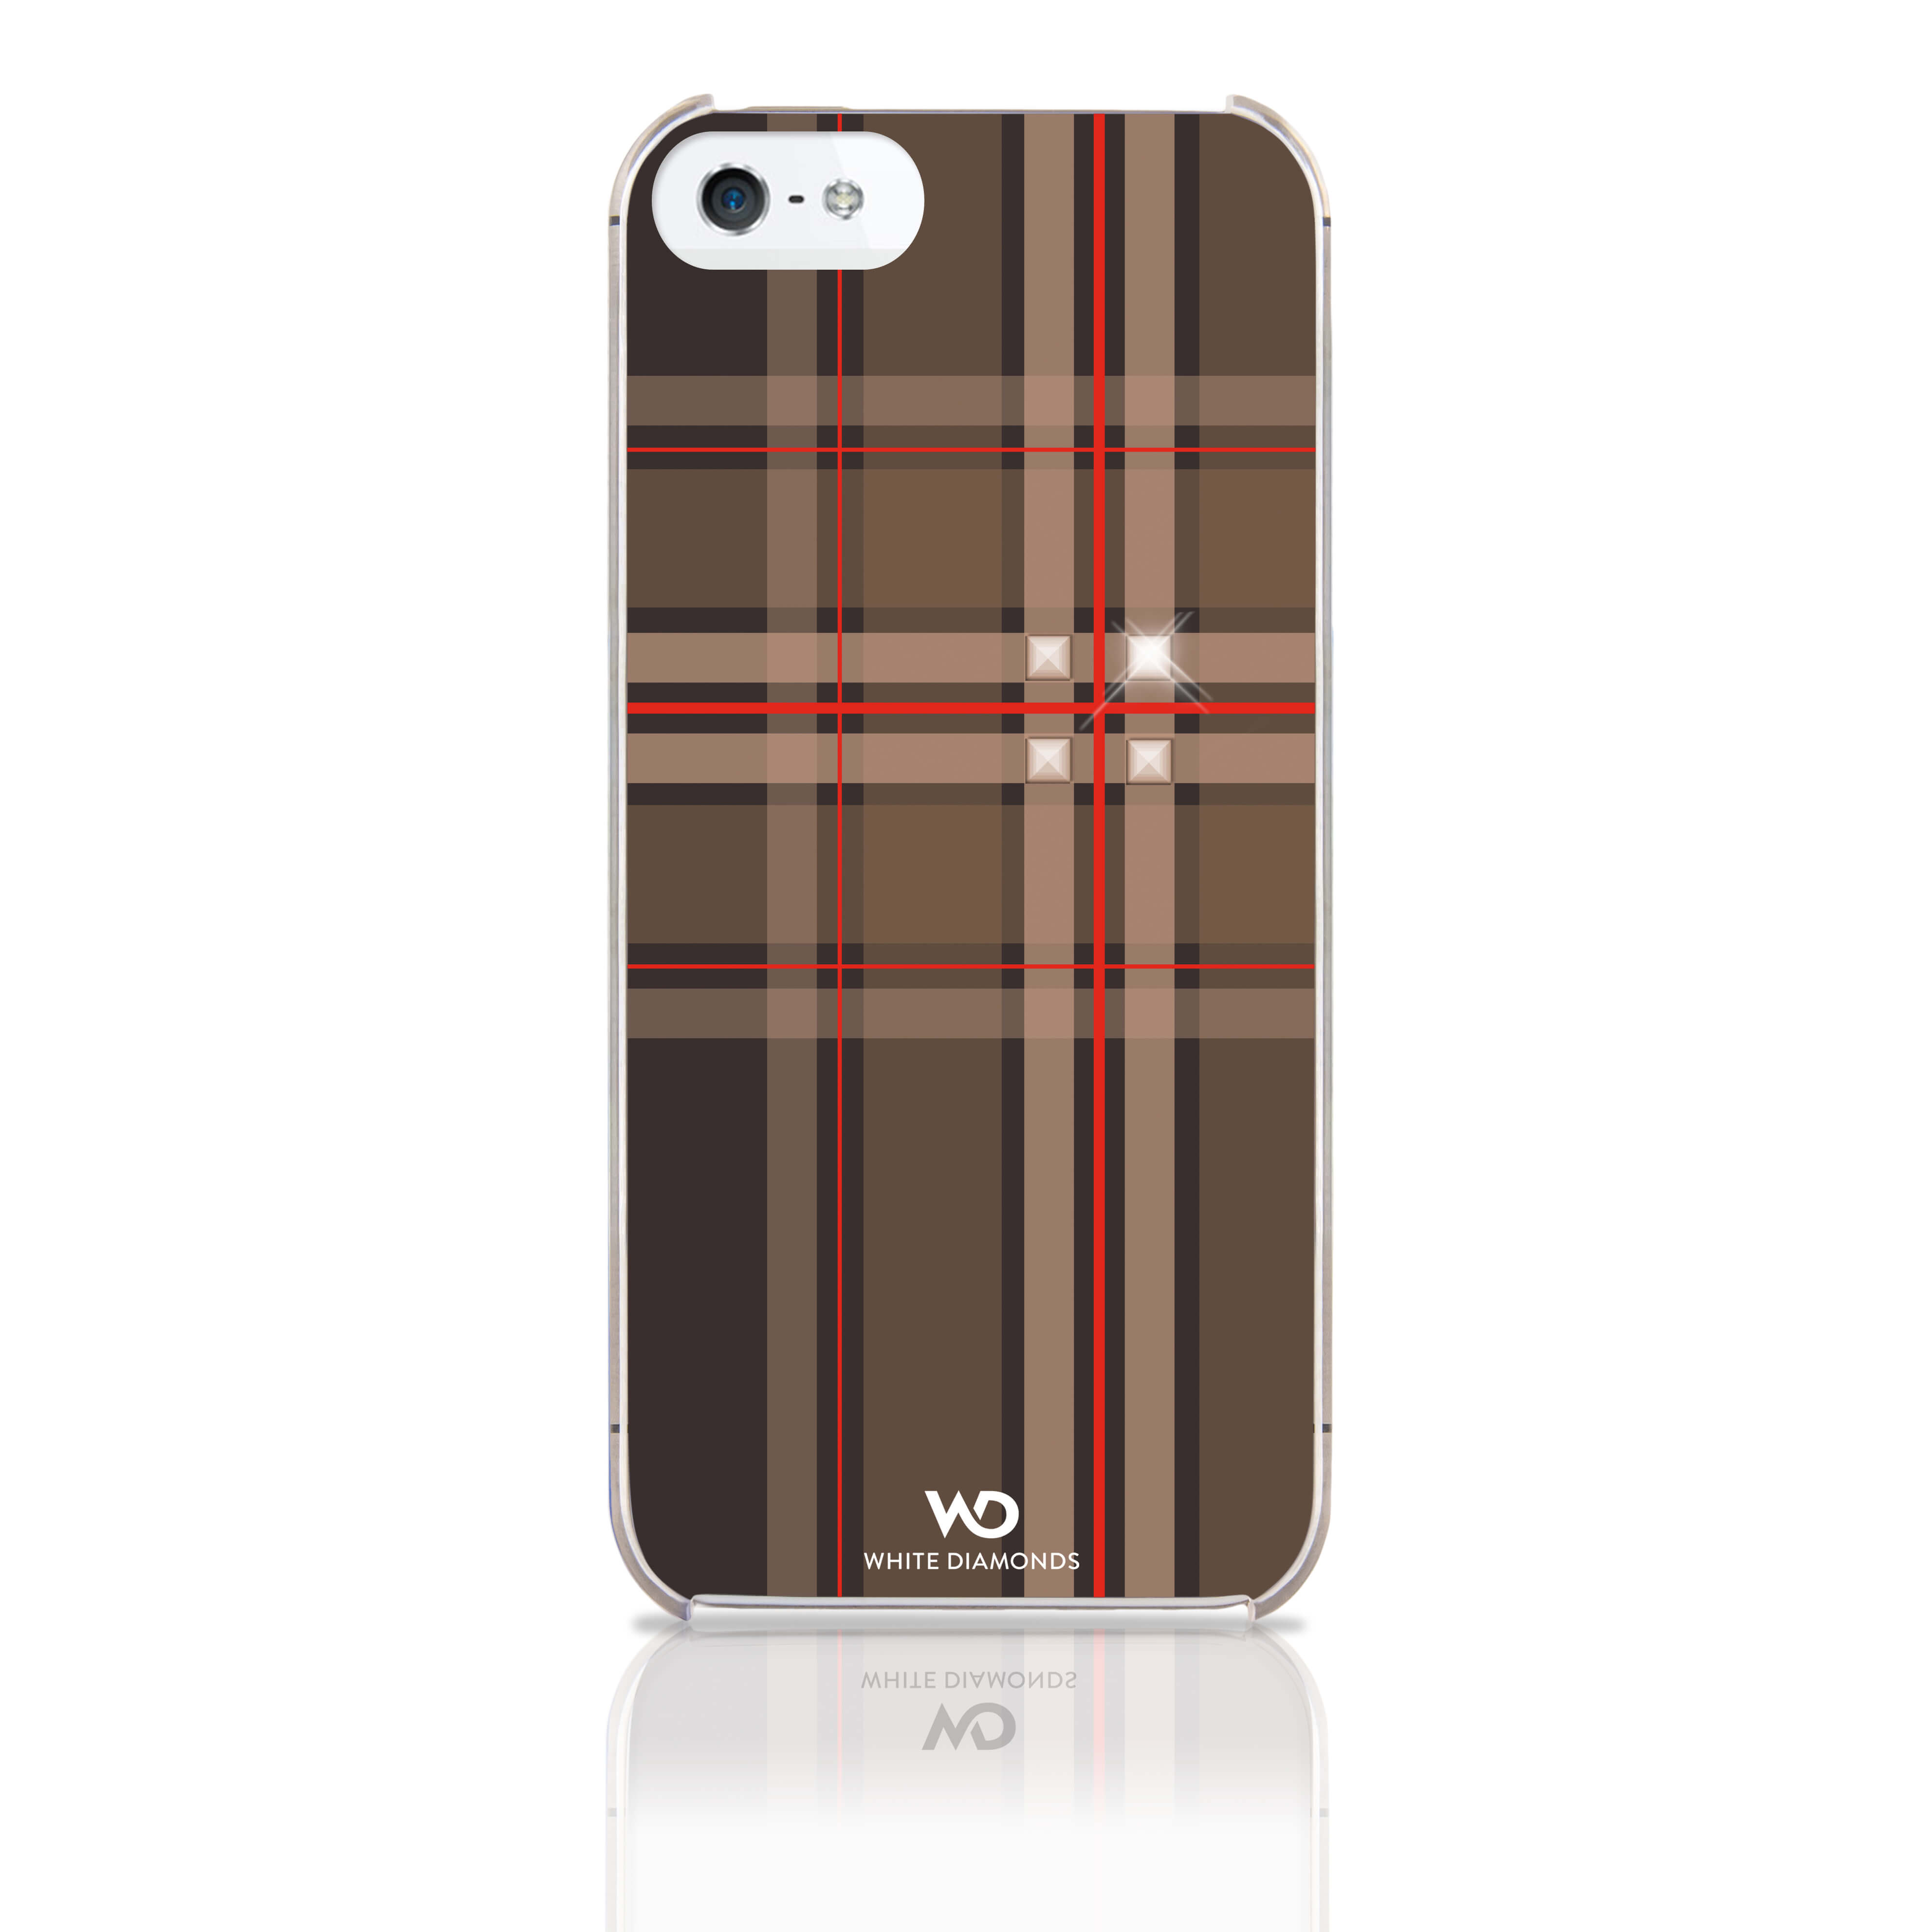 Knox Mobile Phone Cover for A pple iPhone 5/5s, chili chocol